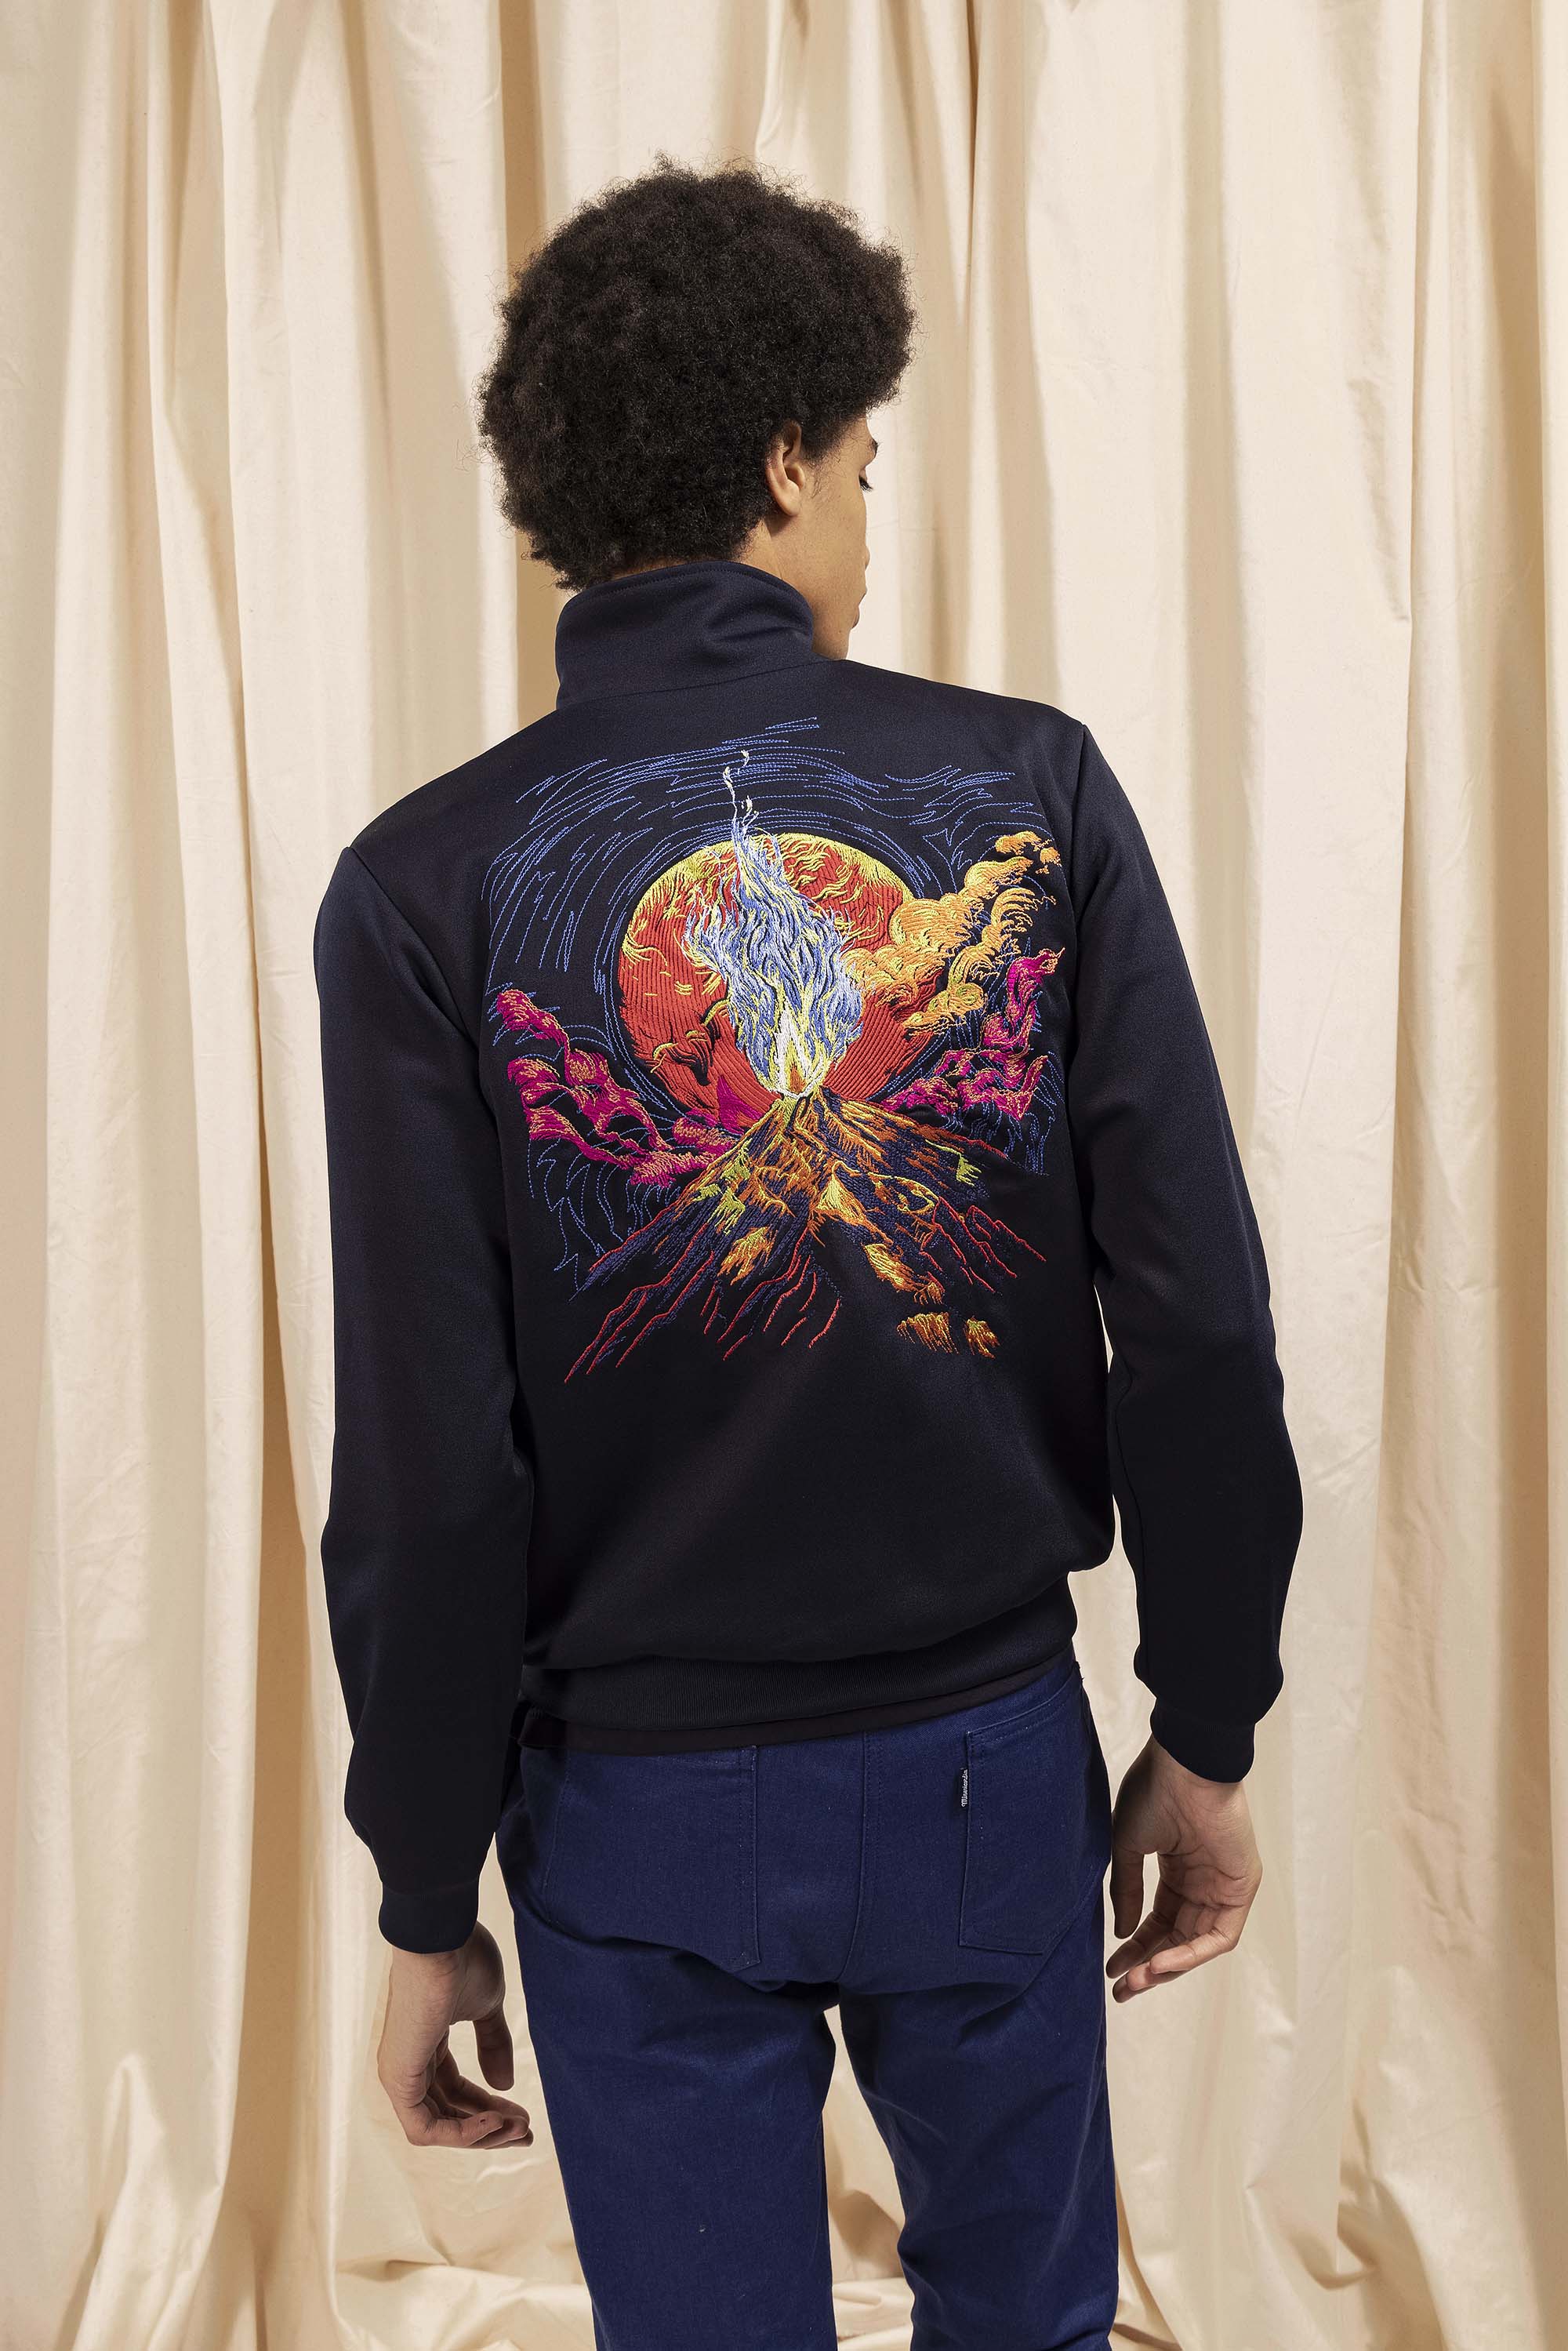 Navy blue sports jacket in cotton and polyester with volcano embroidery